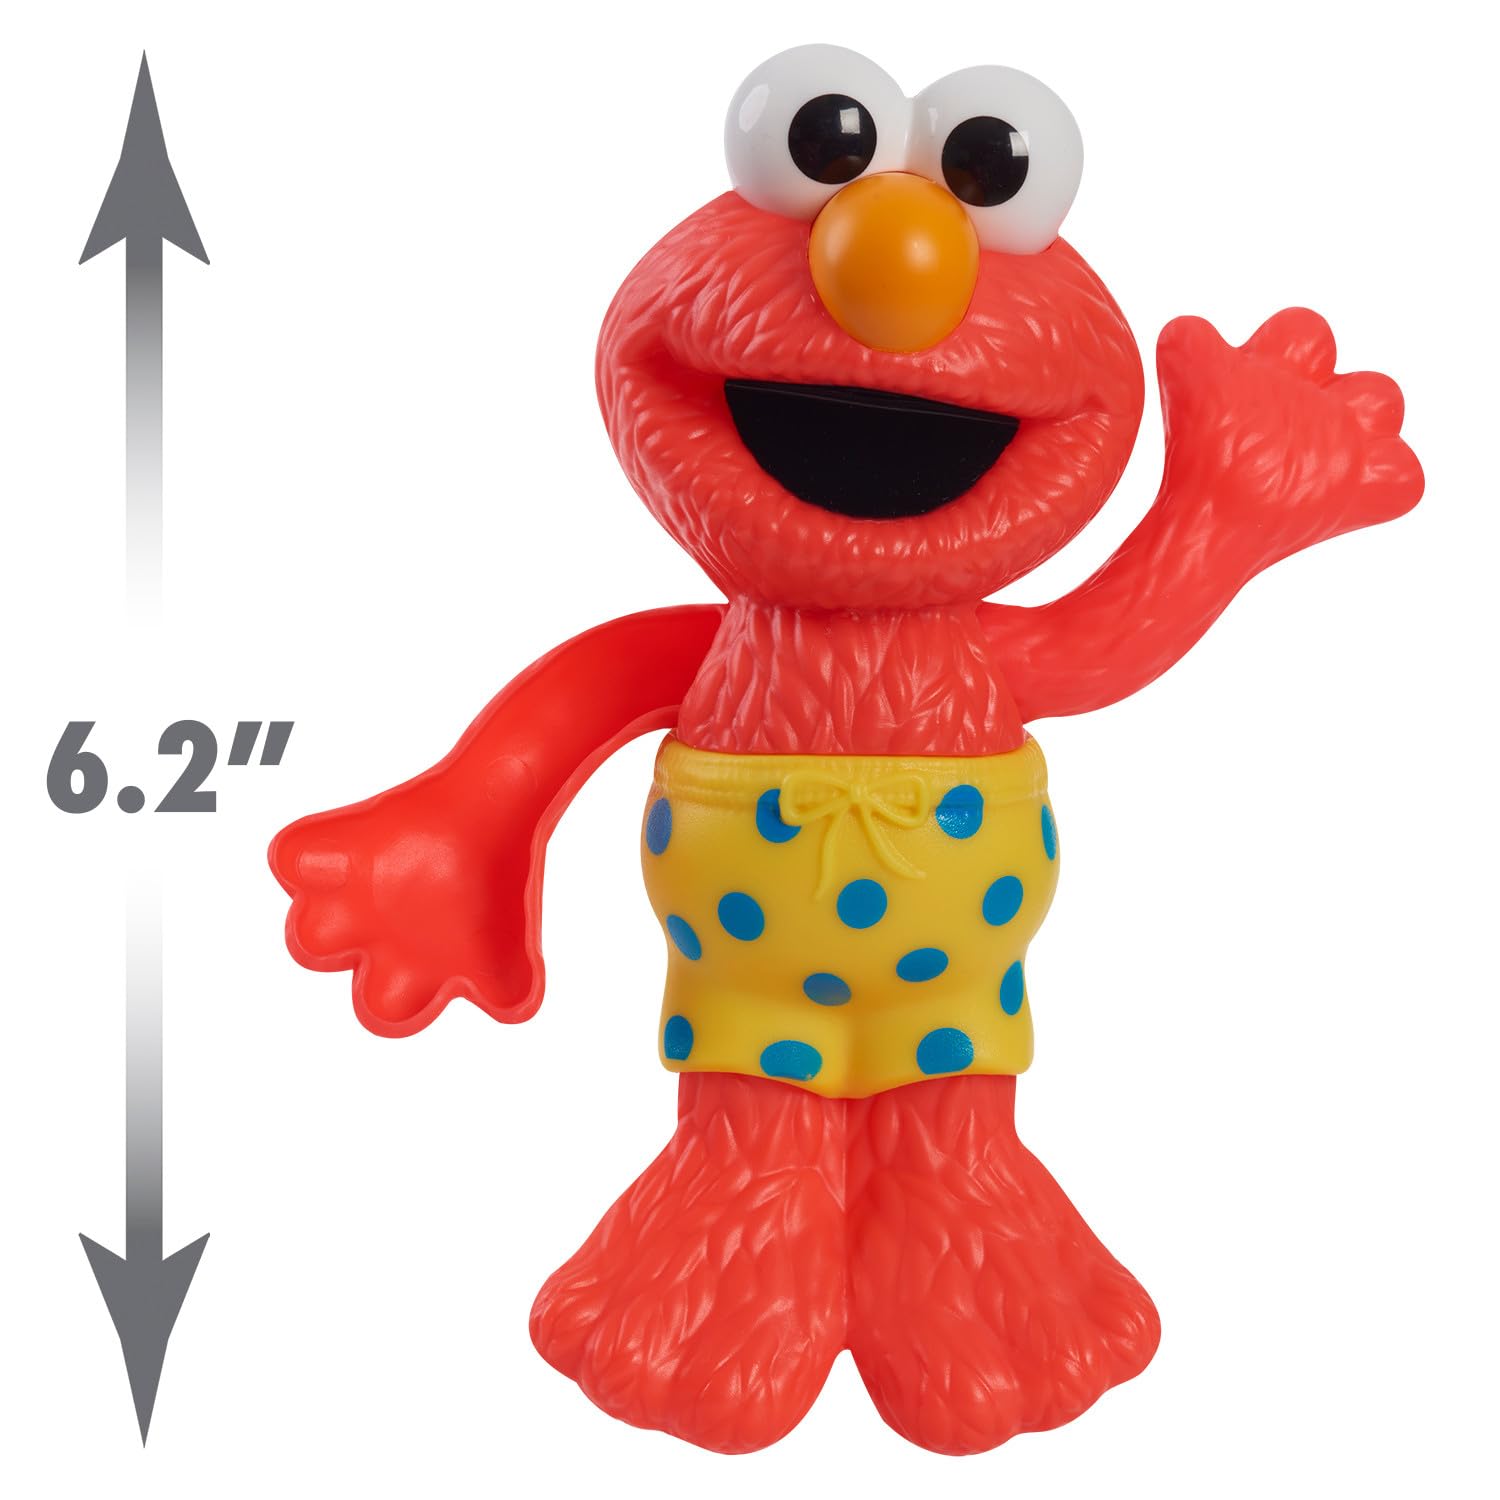 Sesame Street Swim and Splash Elmo Wind Up Bath and Pool Toy, Officially Licensed Kids Toys for Ages 2 Up by Just Play